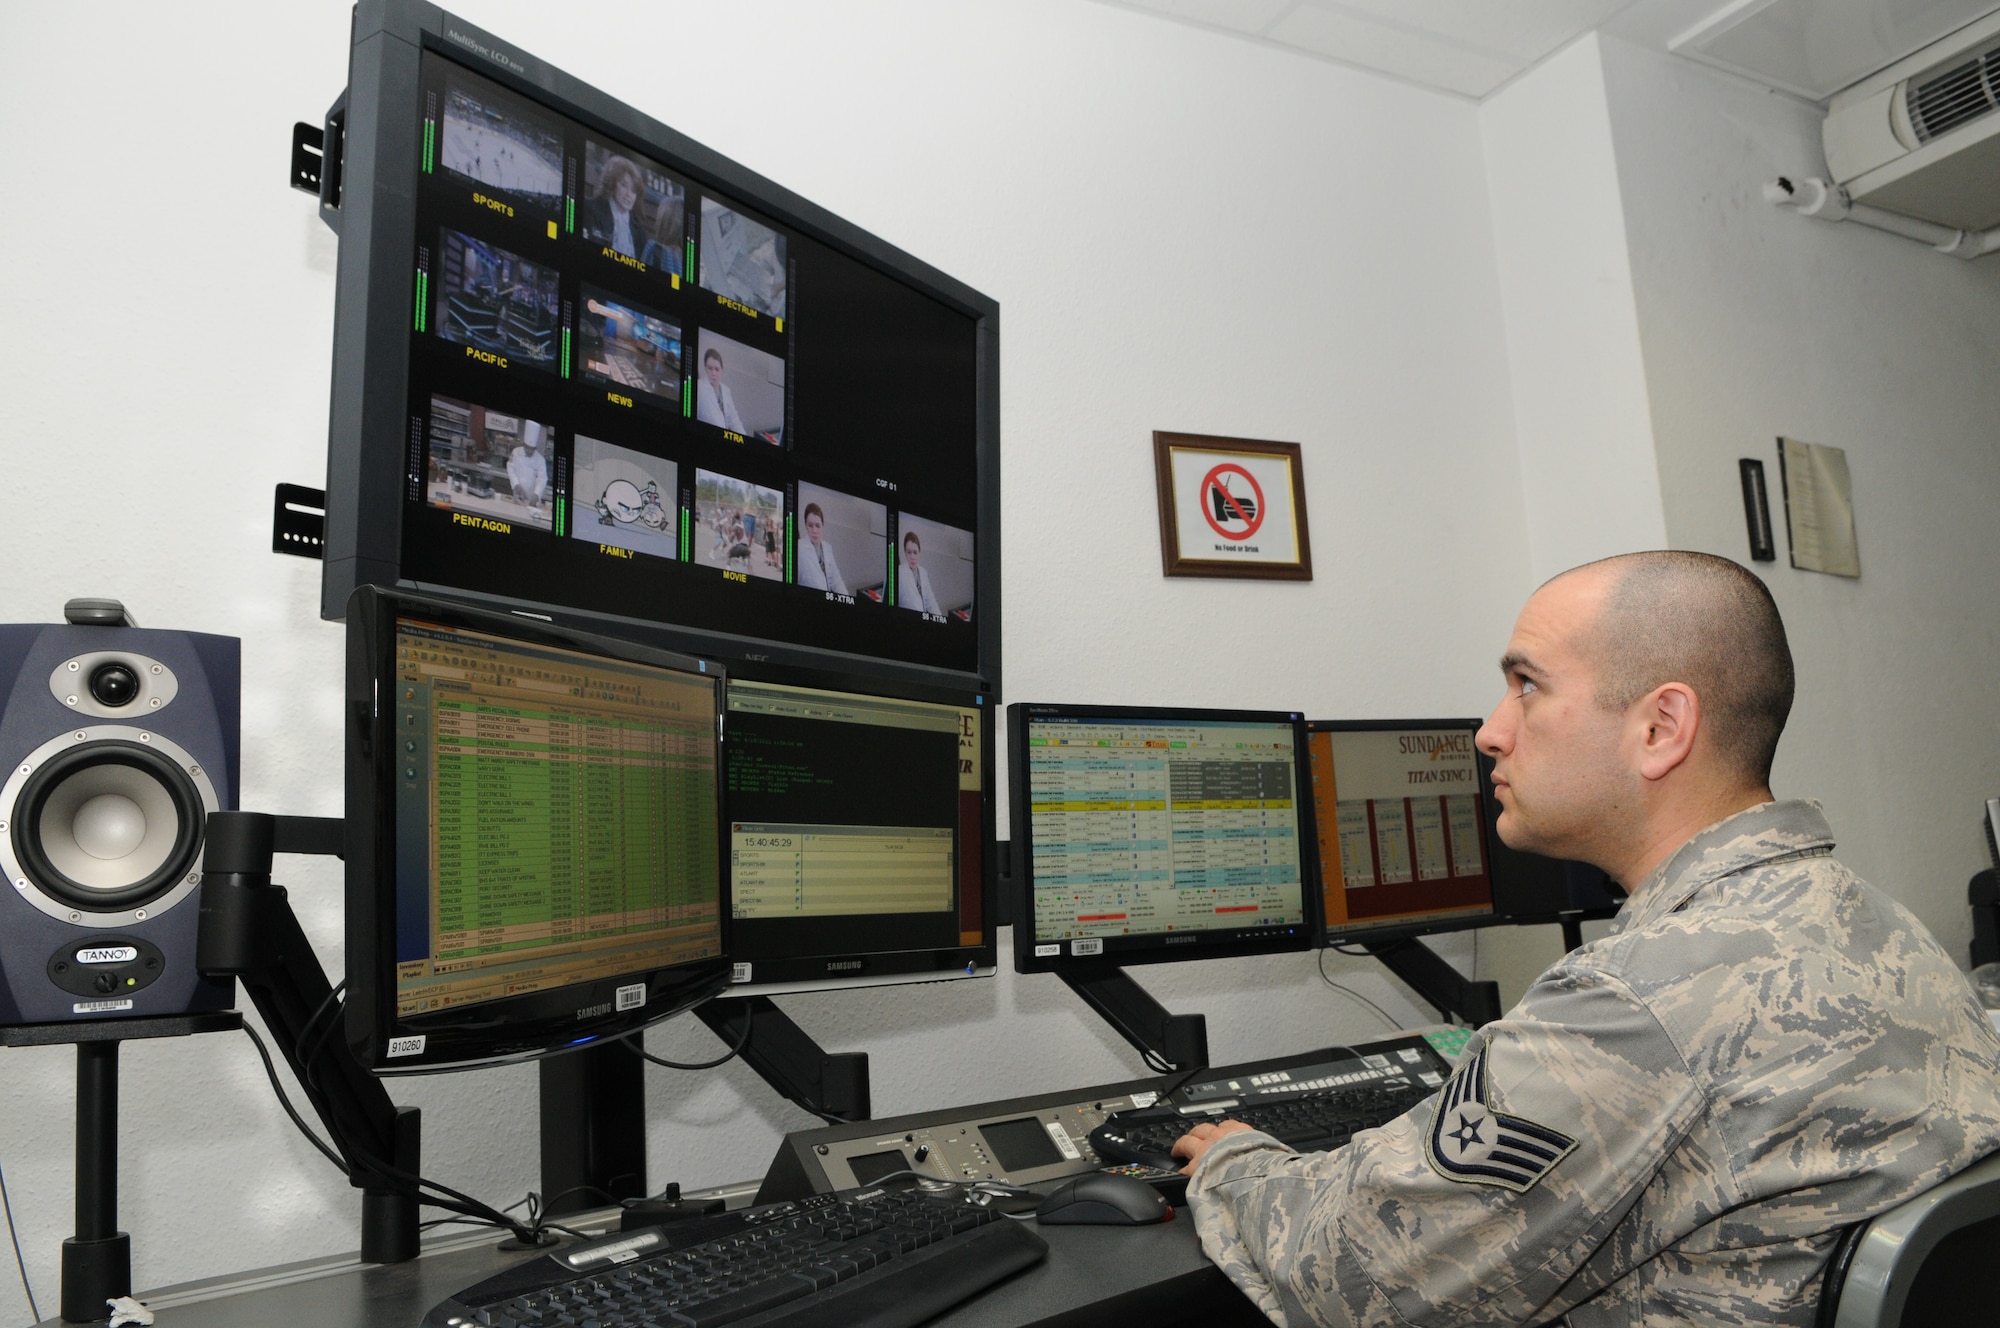 SPANGDAHLEM AIR BASE, Germany – Staff Sgt. Modesto Alcala, Armed Forces Network Spangdahlem broadcast maintenance supervisor, assigns times for shows to be seen on AFN Spangdahlem television channels April 20 at Bitburg Annex. According to Defense Media Activity, AFN Spangdahlem TV channels are expected to be in high definition in the next two to three years. (U.S. Air Force photo/Senior Airman Nick Wilson)